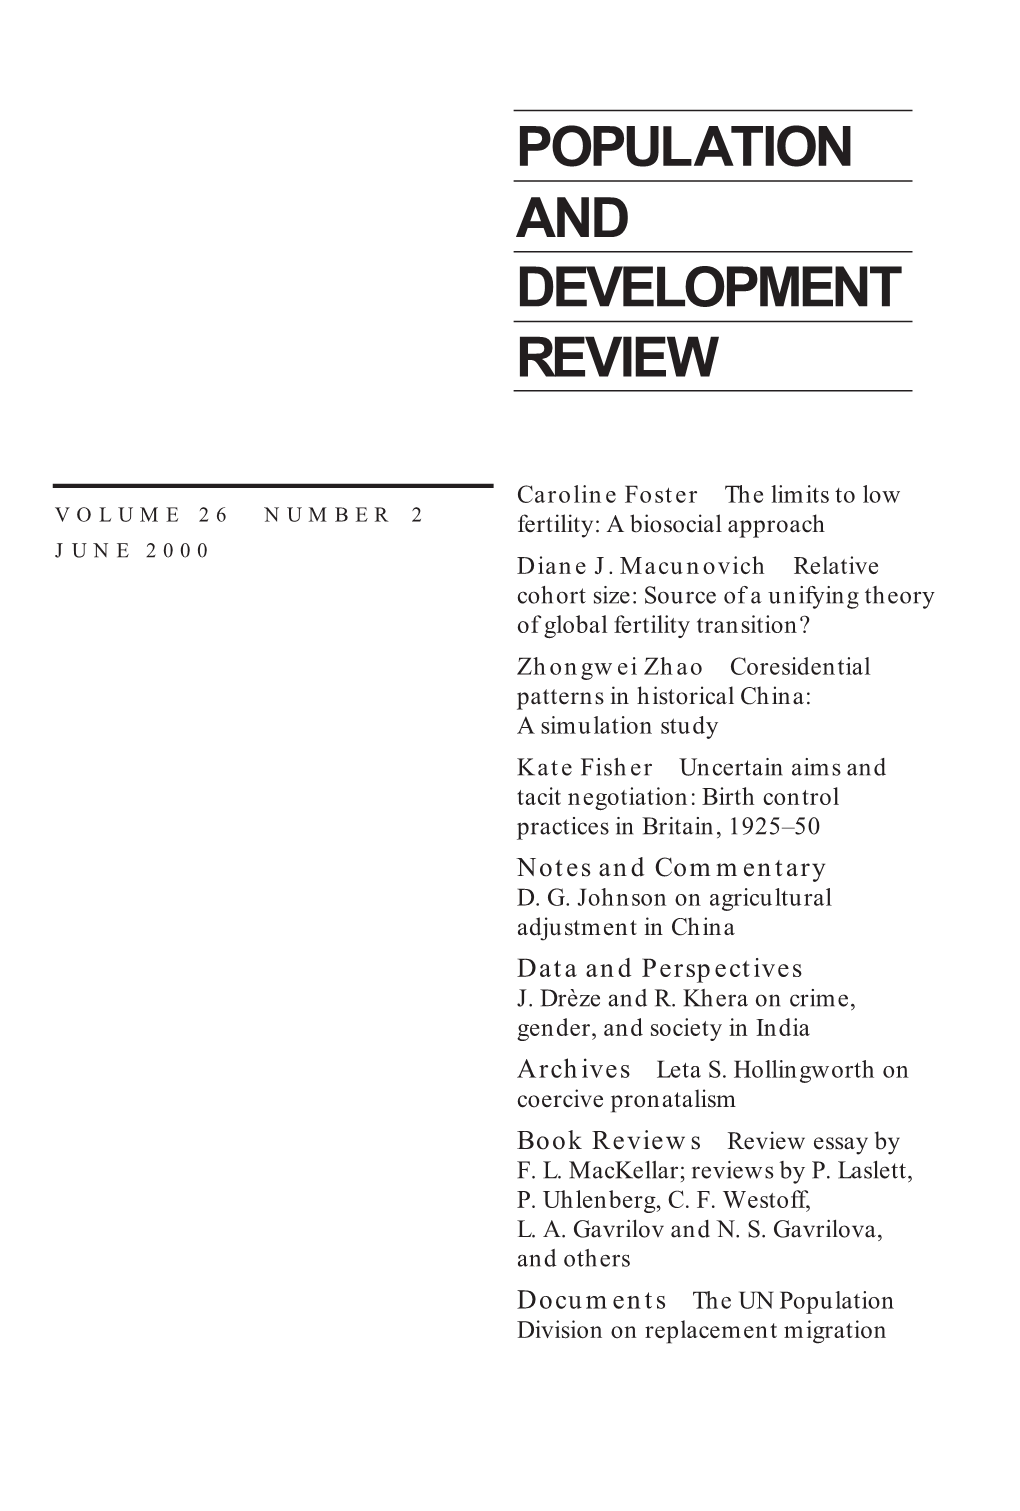 Population and Development Review, Volume 26, Number 2